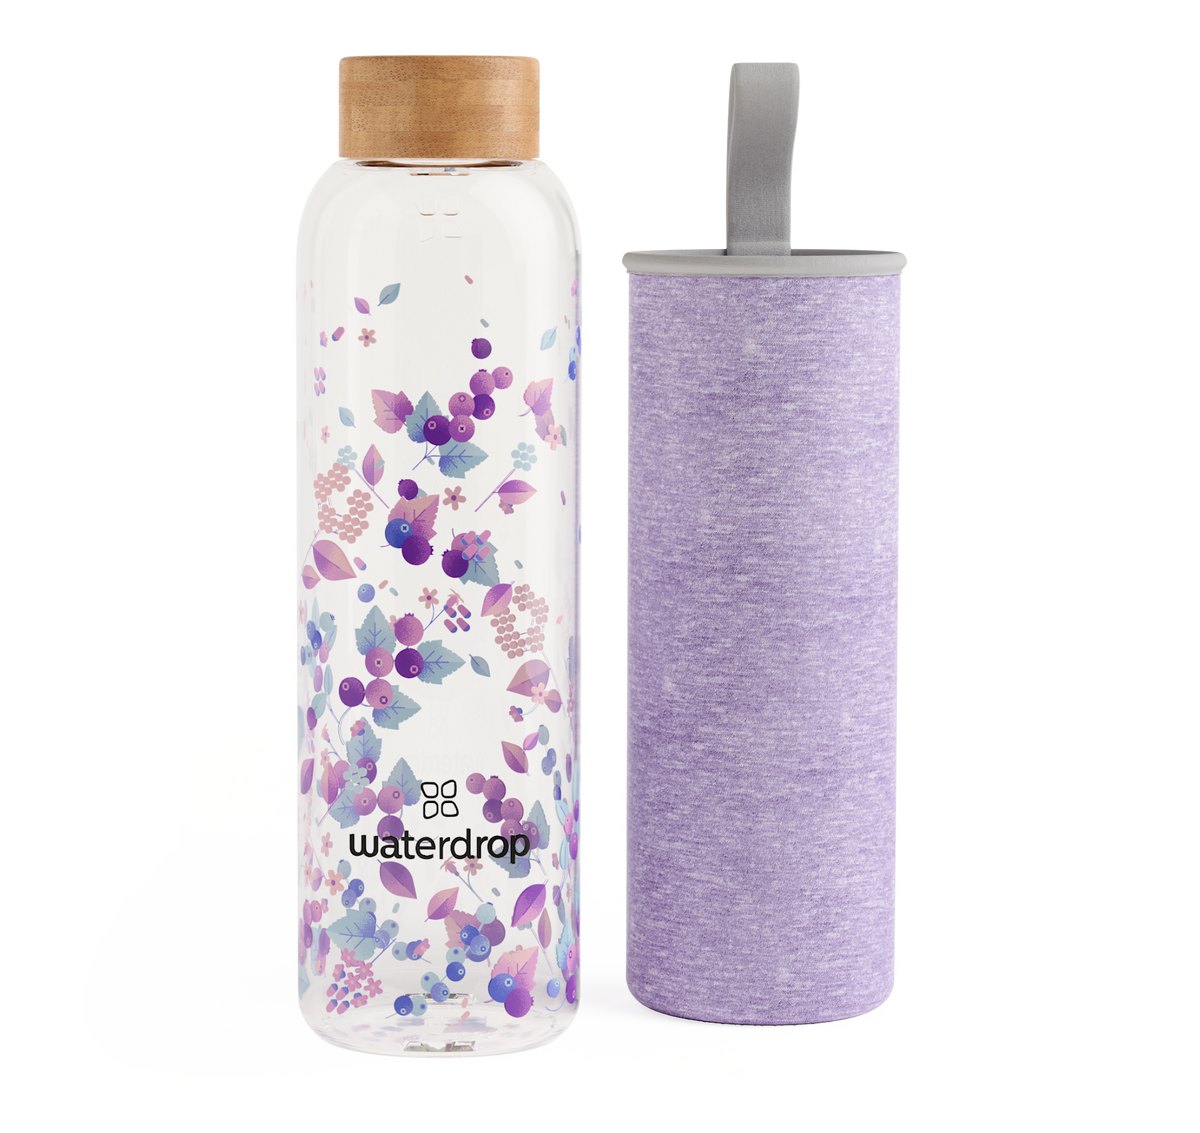 Edition Glass Bottle New Pattern Color Sleeve -600ml - Boost -Standing -nobg.png__PID:ccad6471-c028-4861-9c08-4f01756c625b